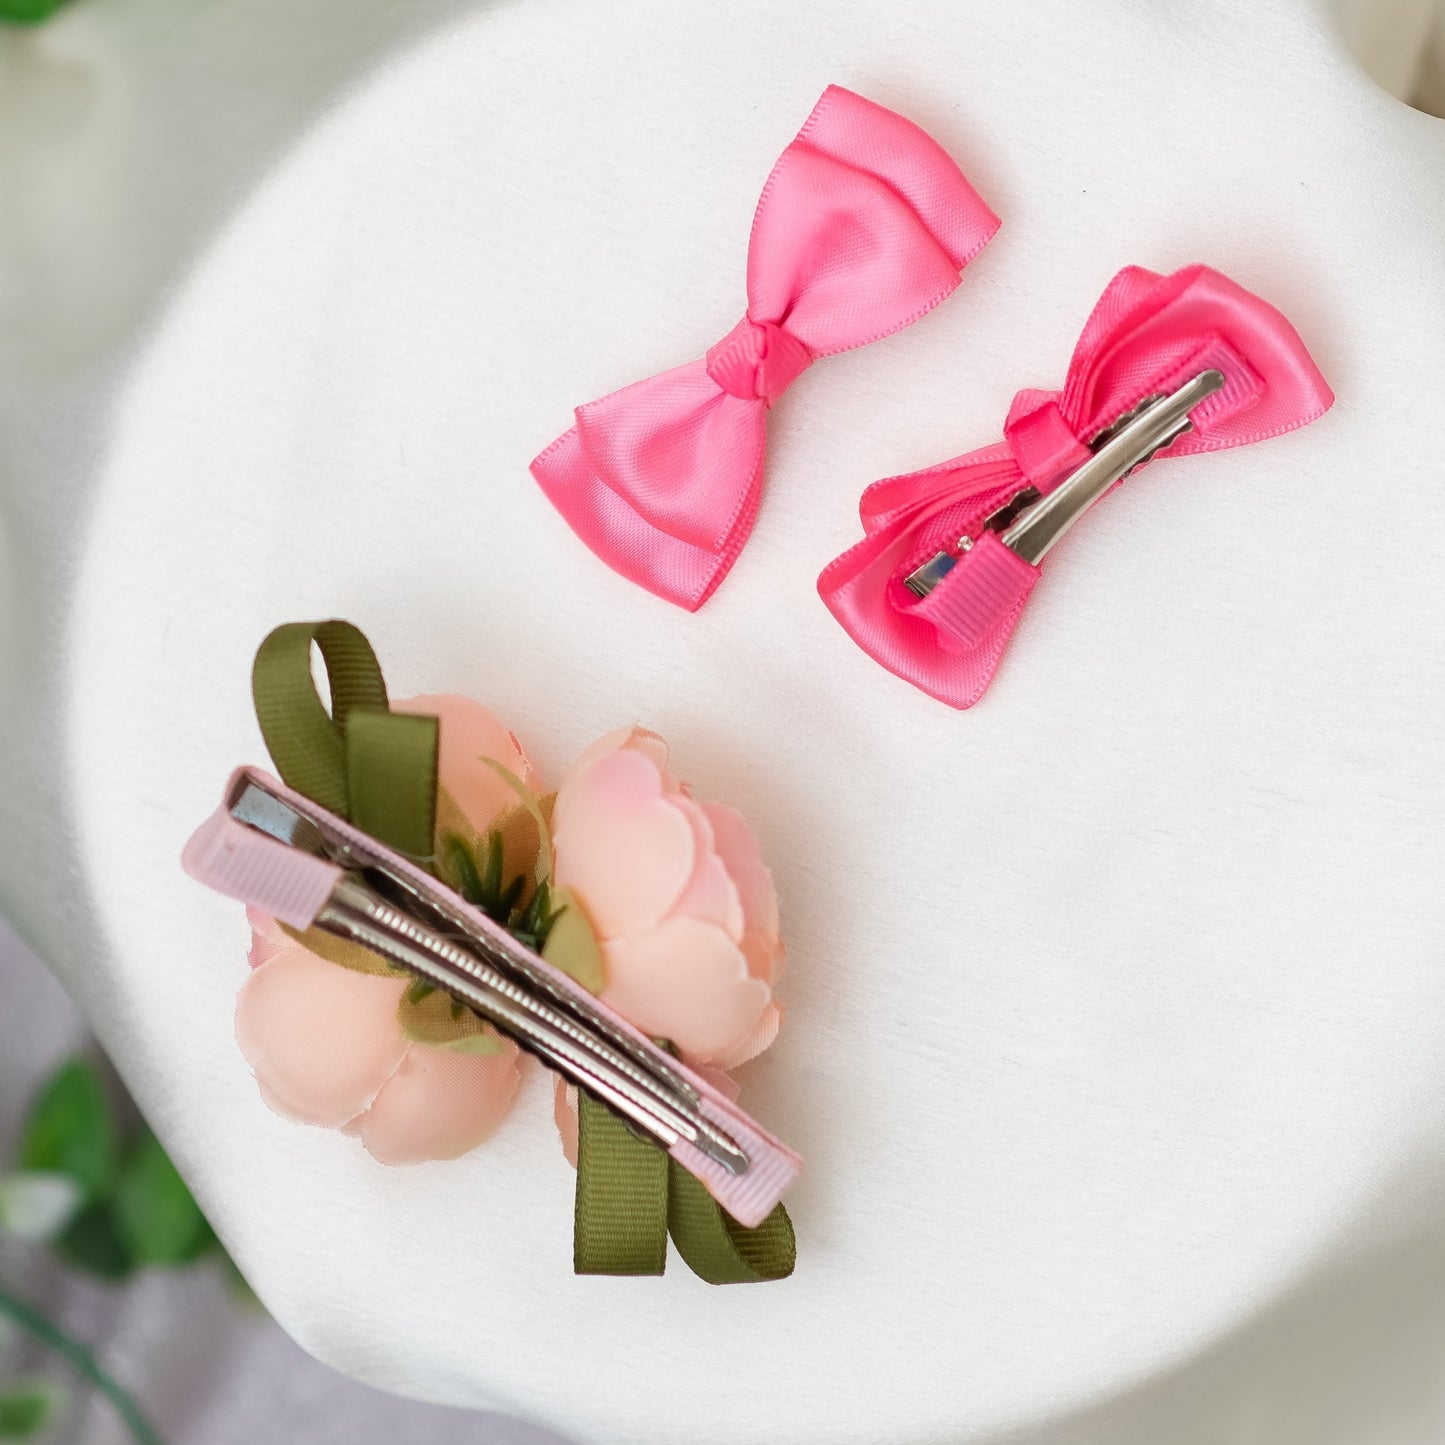 Decorative flower ornamented on alligator clip along with shiny satin double bow alligator clips - Peach and Pink (Set of 1 pair and 1 single clip - 3 quantity)